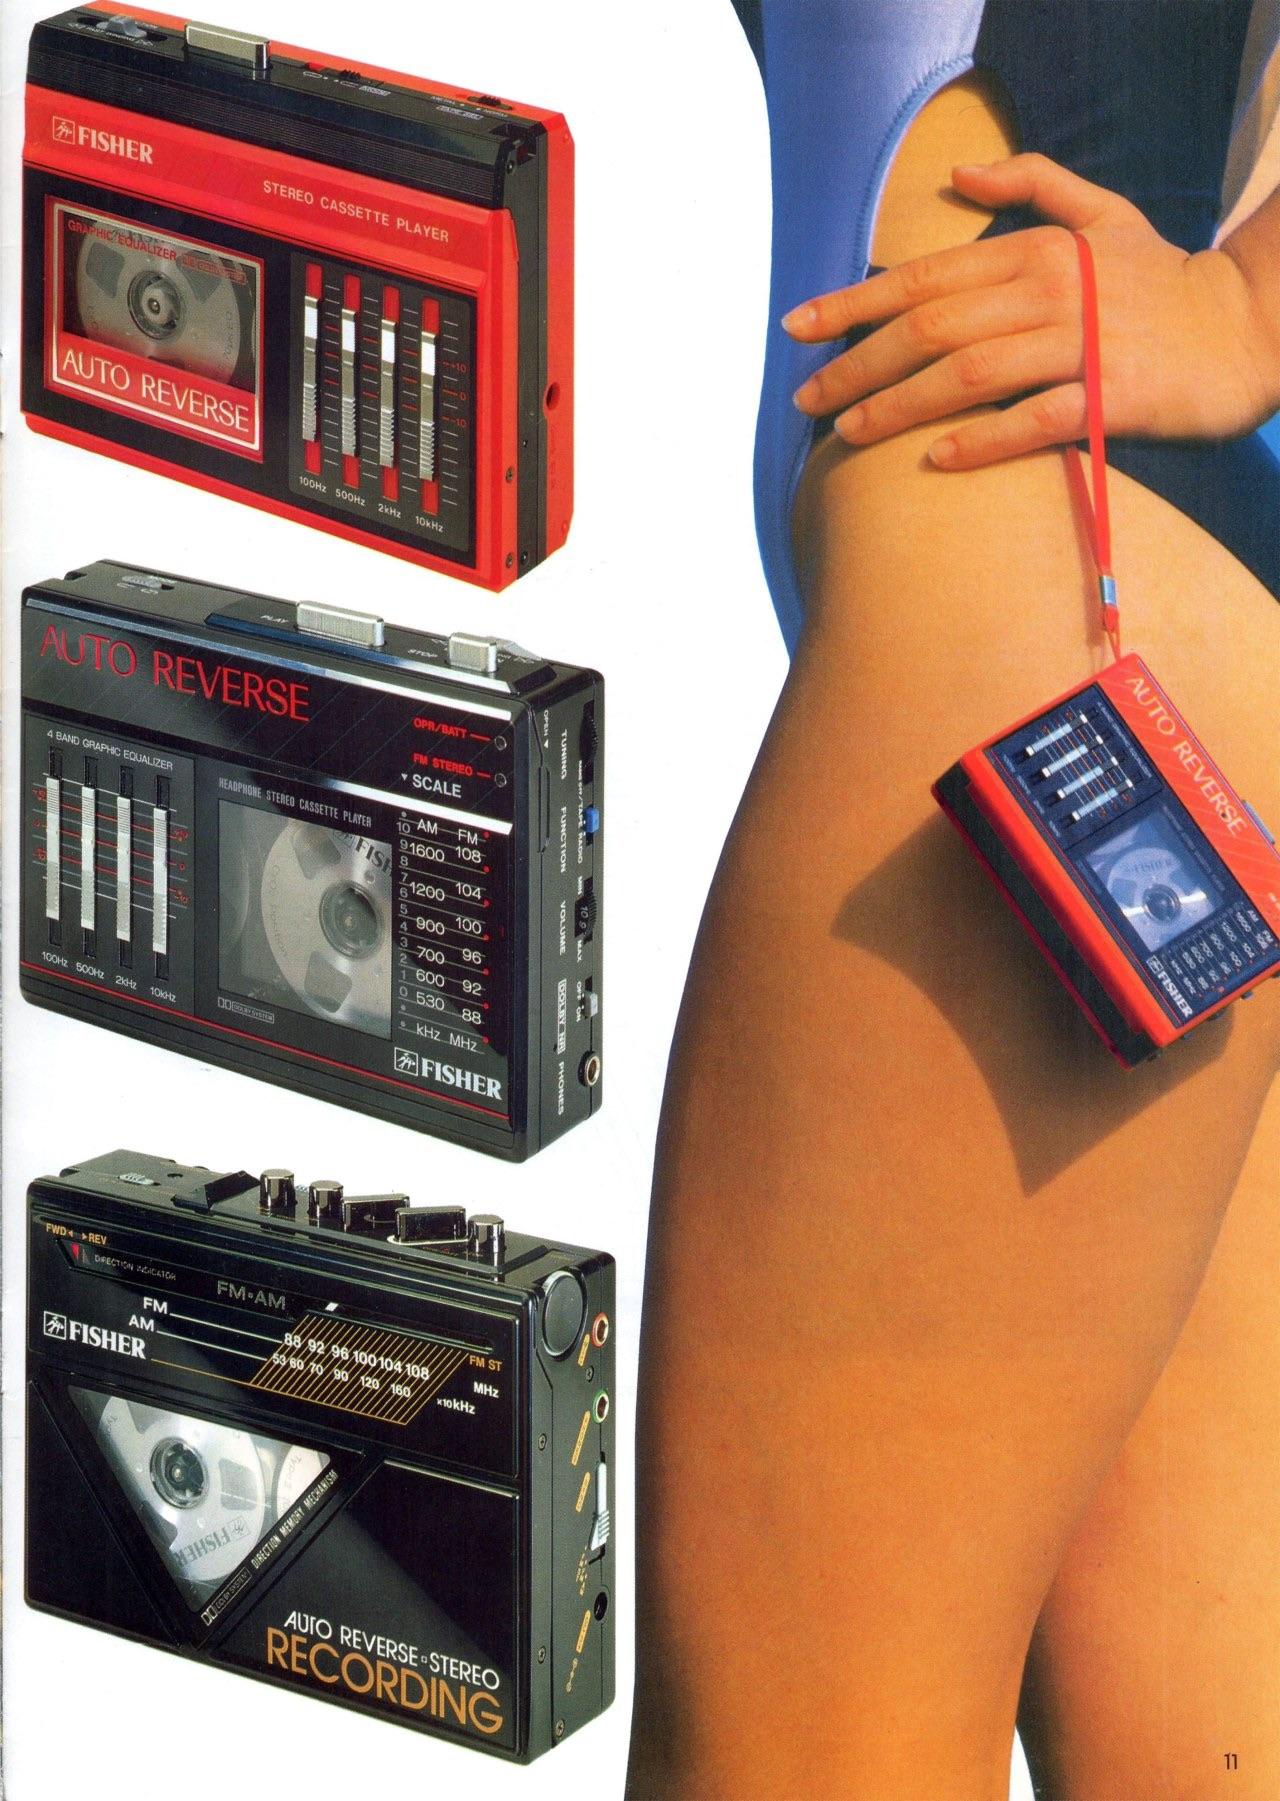 A woman appears from the waist down in a swimsuit holding a walkman